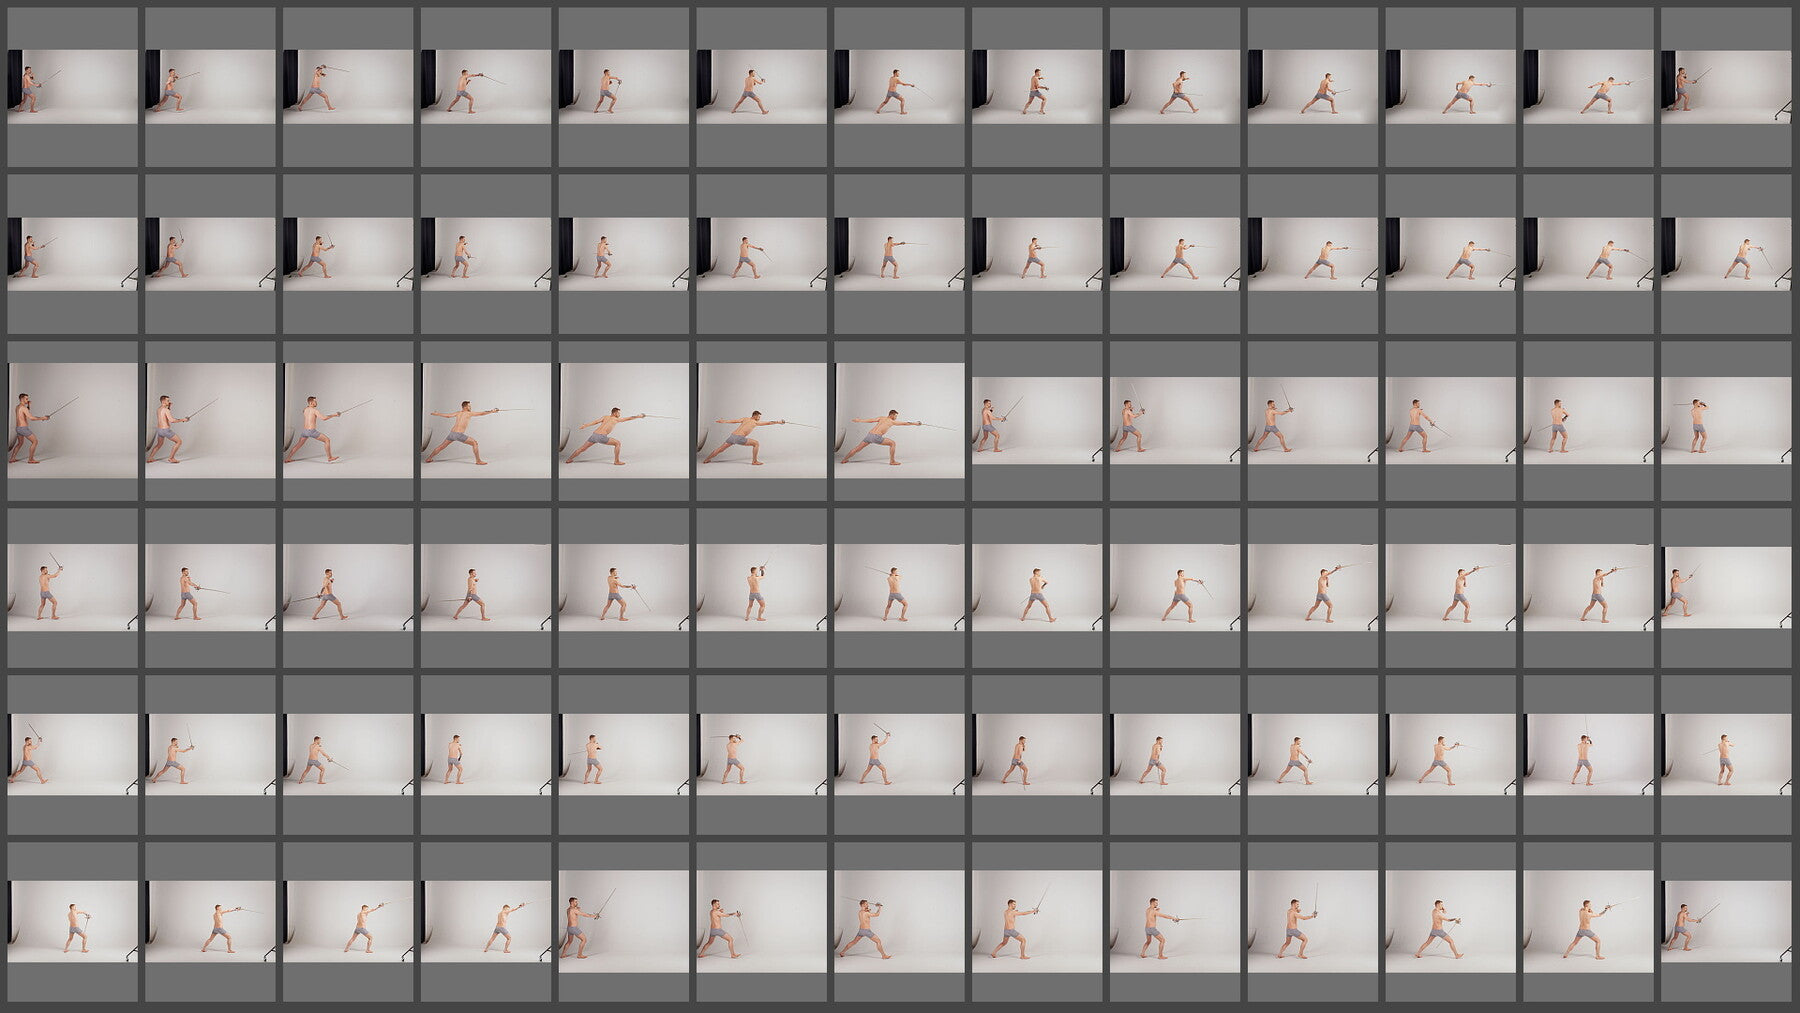 600+ Reference Photos - Sword Fighting (Sequential Movement)